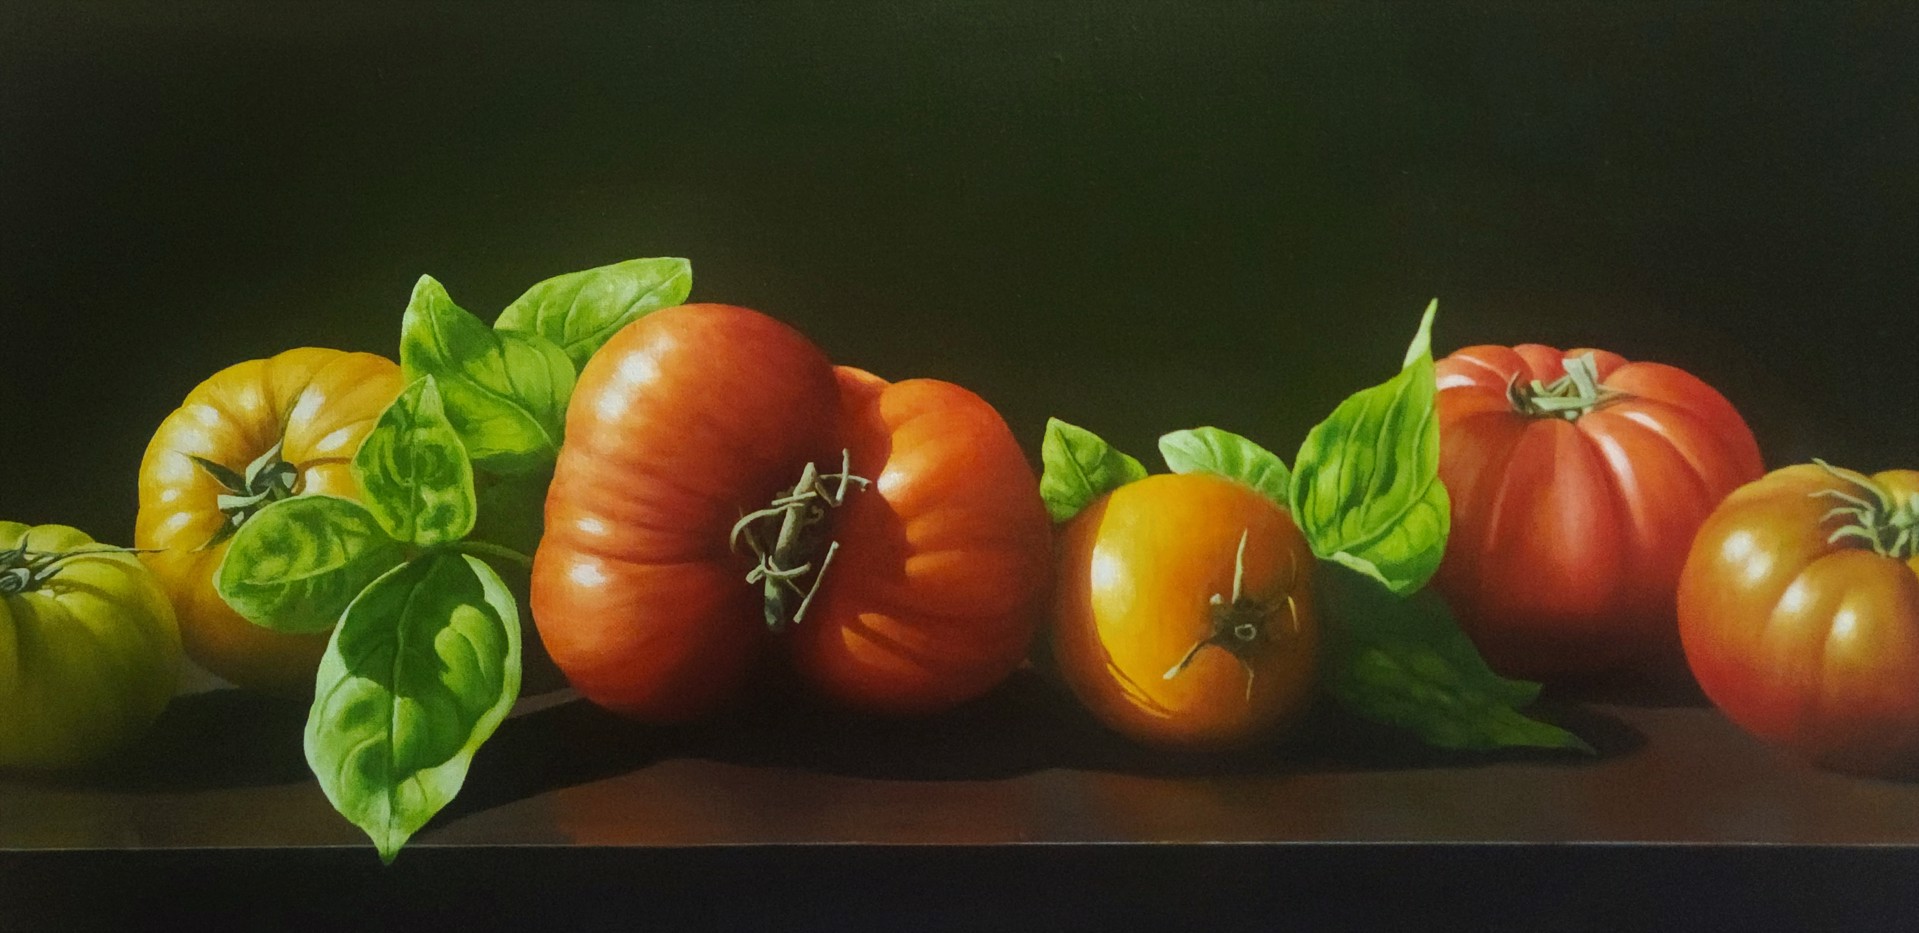 Tomatoes and Basel by Loren DiBenedetto, OPA